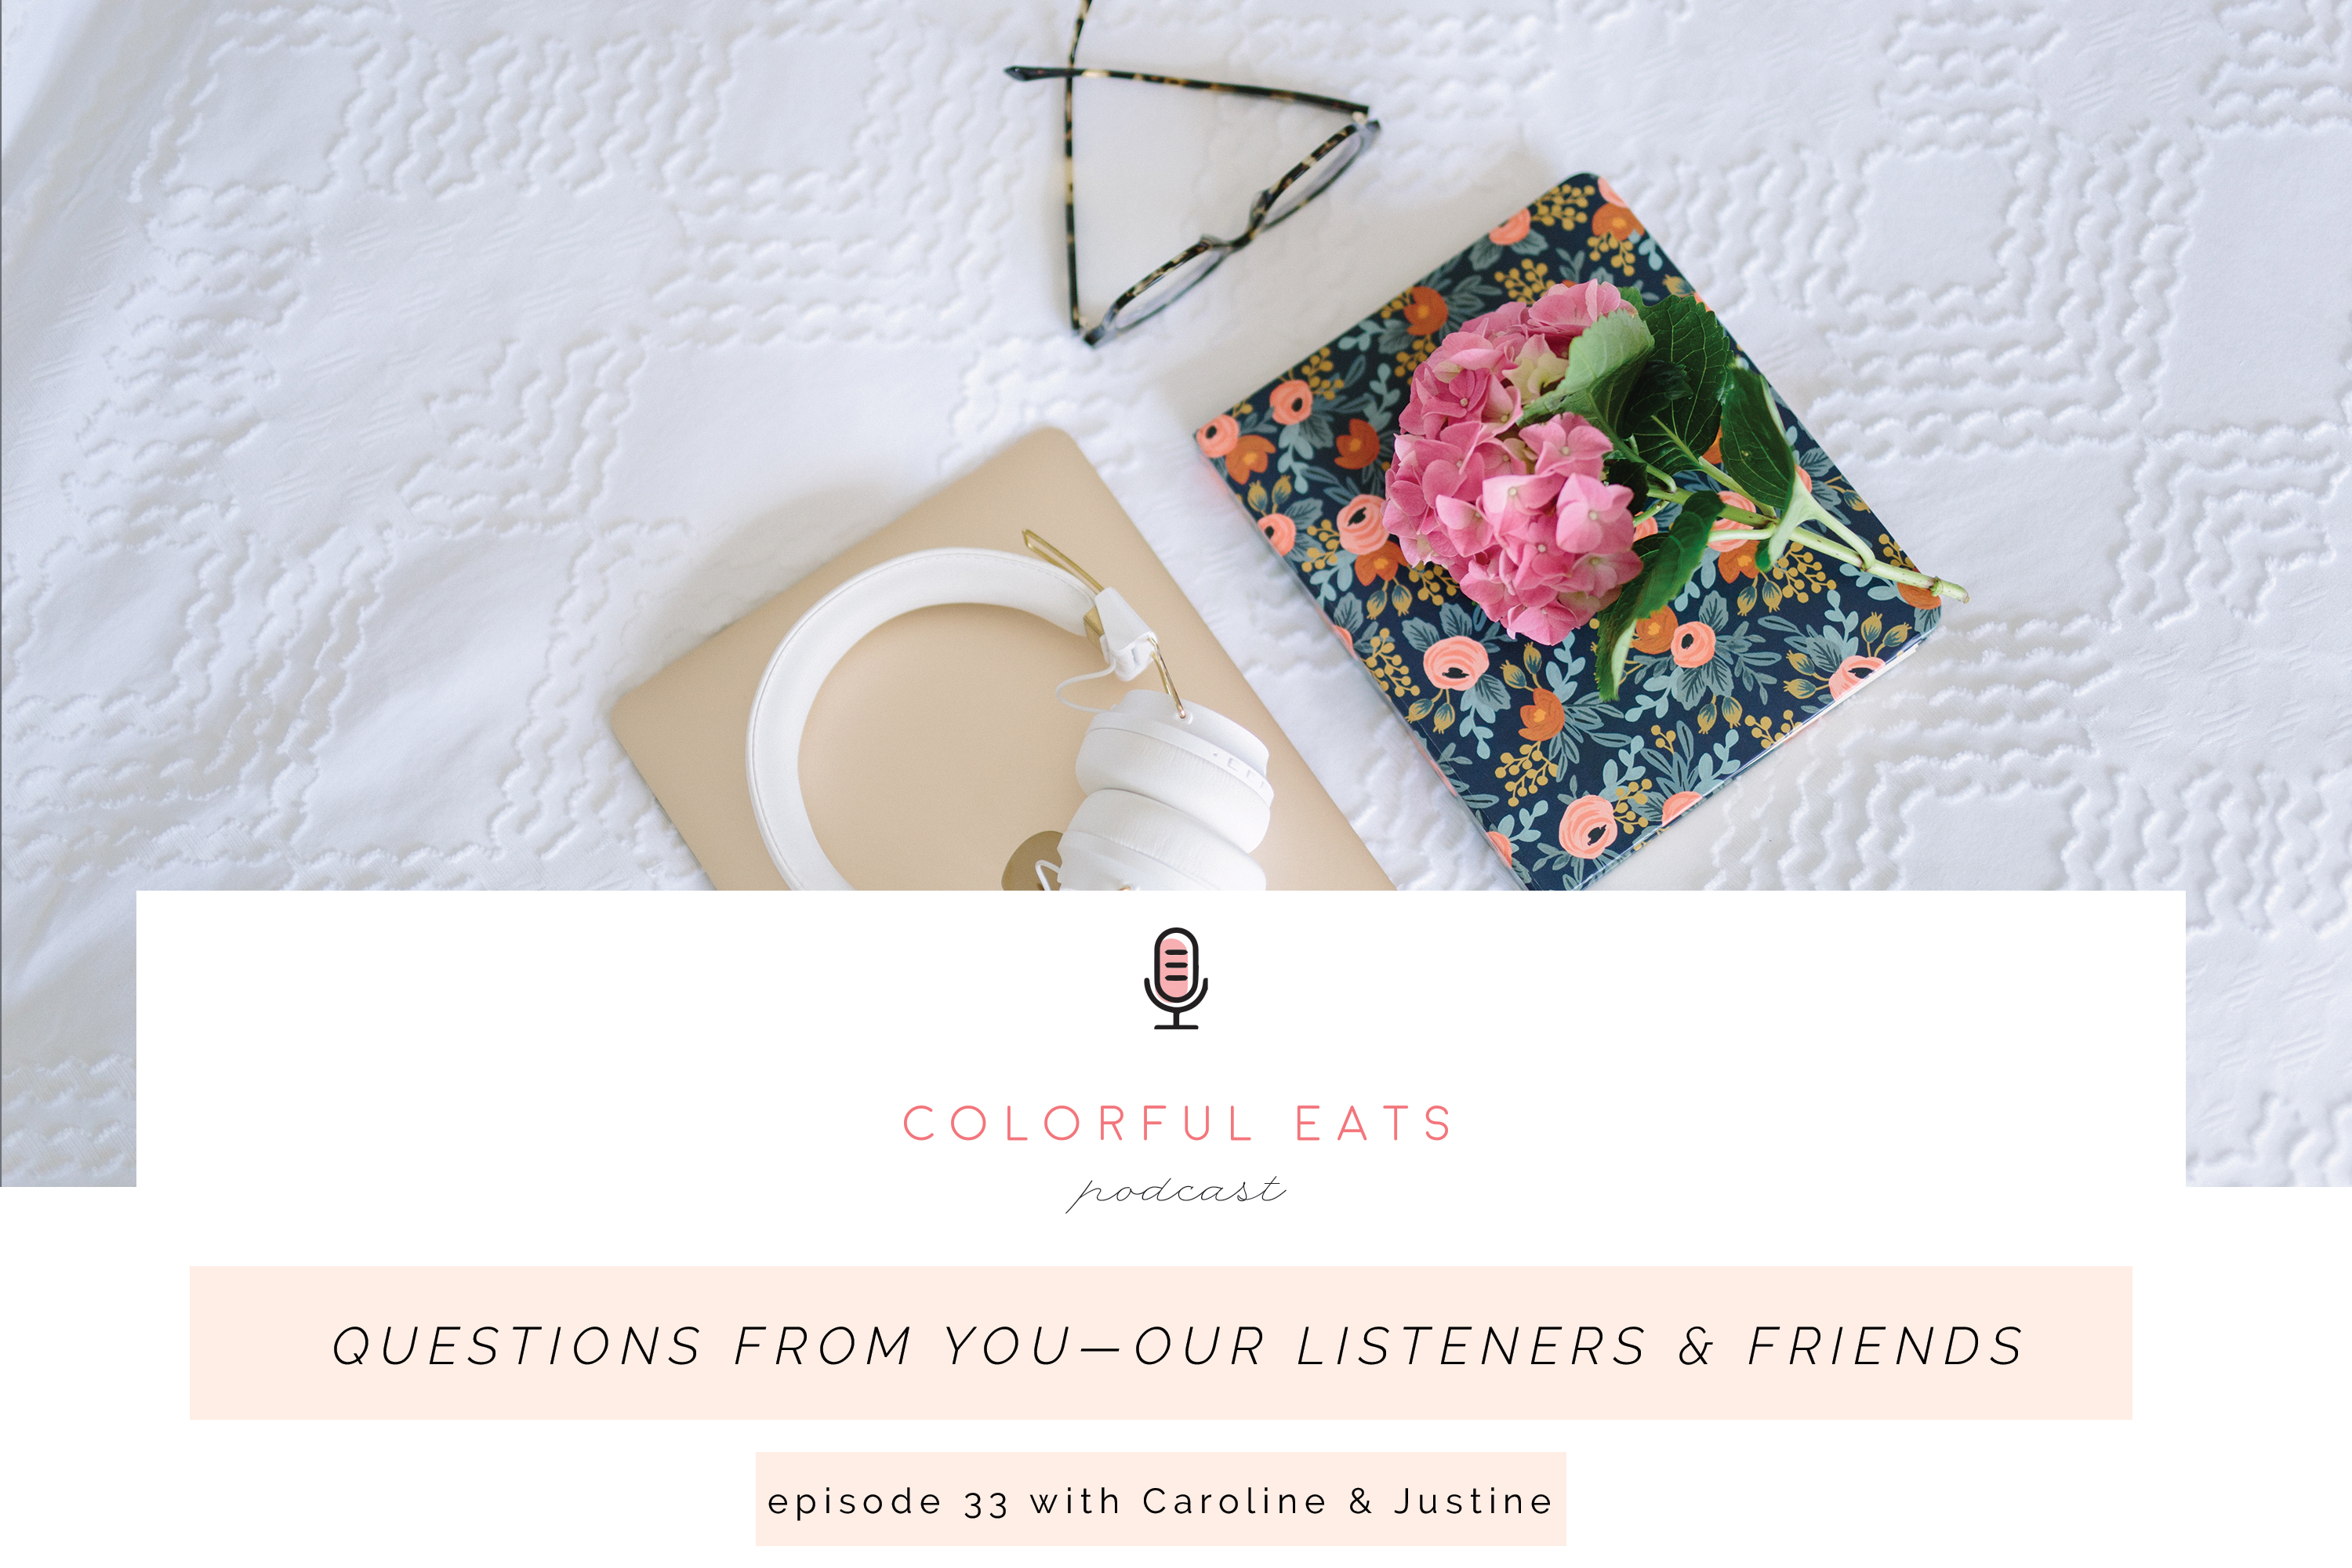 Colorful Eats Podcast Episode 33: Questions from YOU—Our Listeners & Friends